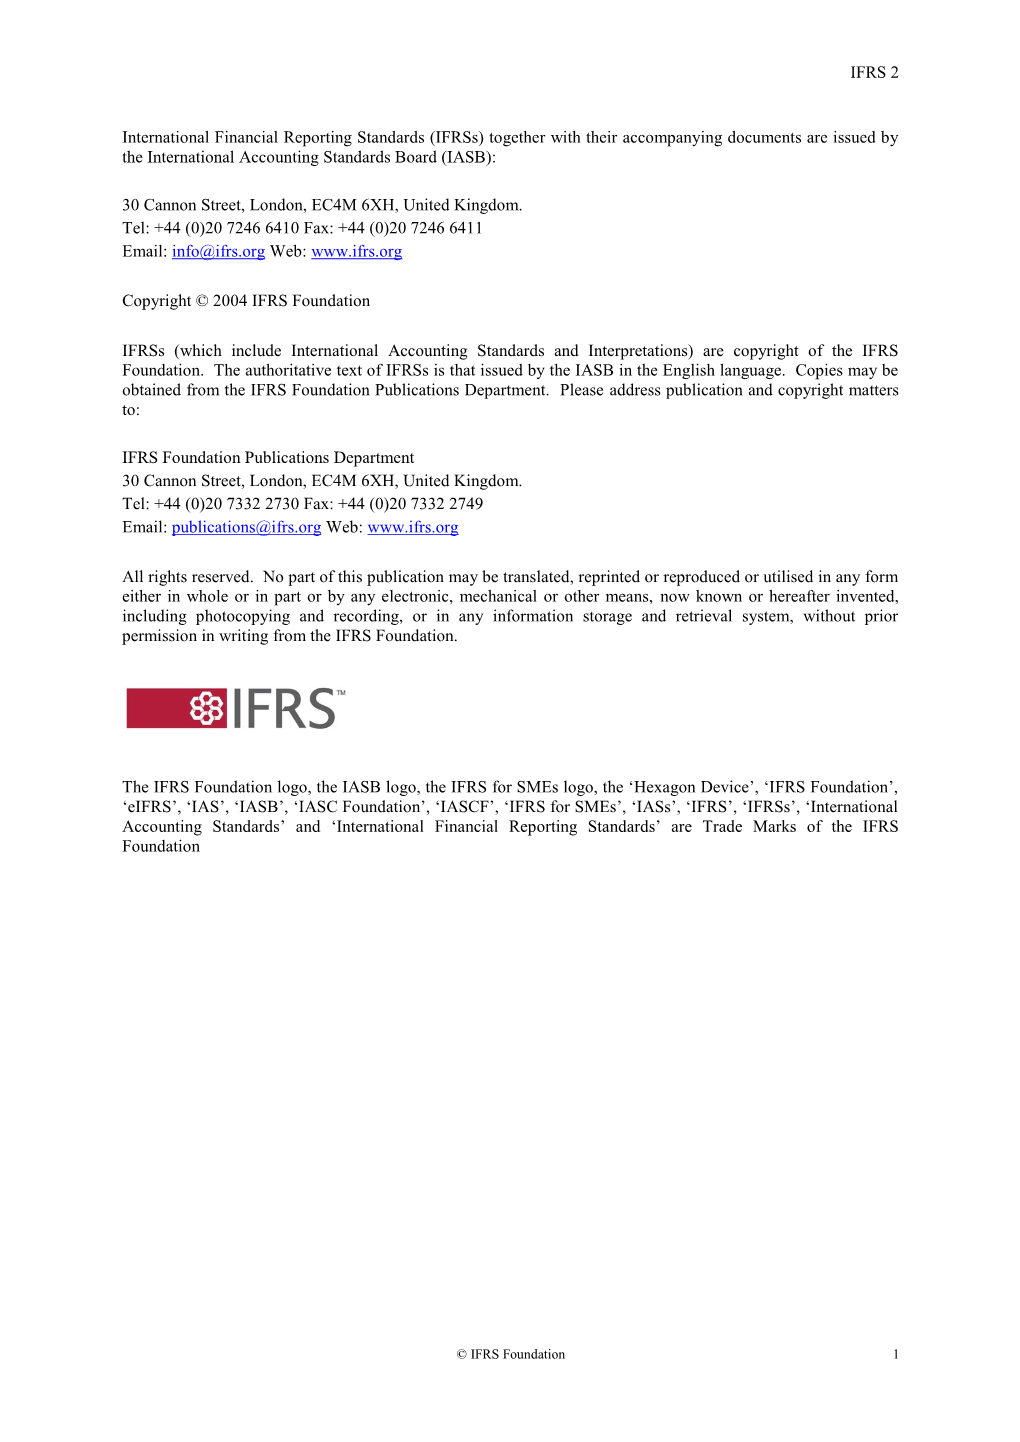 IFRS 2 International Financial Reporting Standards (Ifrss) Together with Their Accompanying Documents Are Issued by the Internat